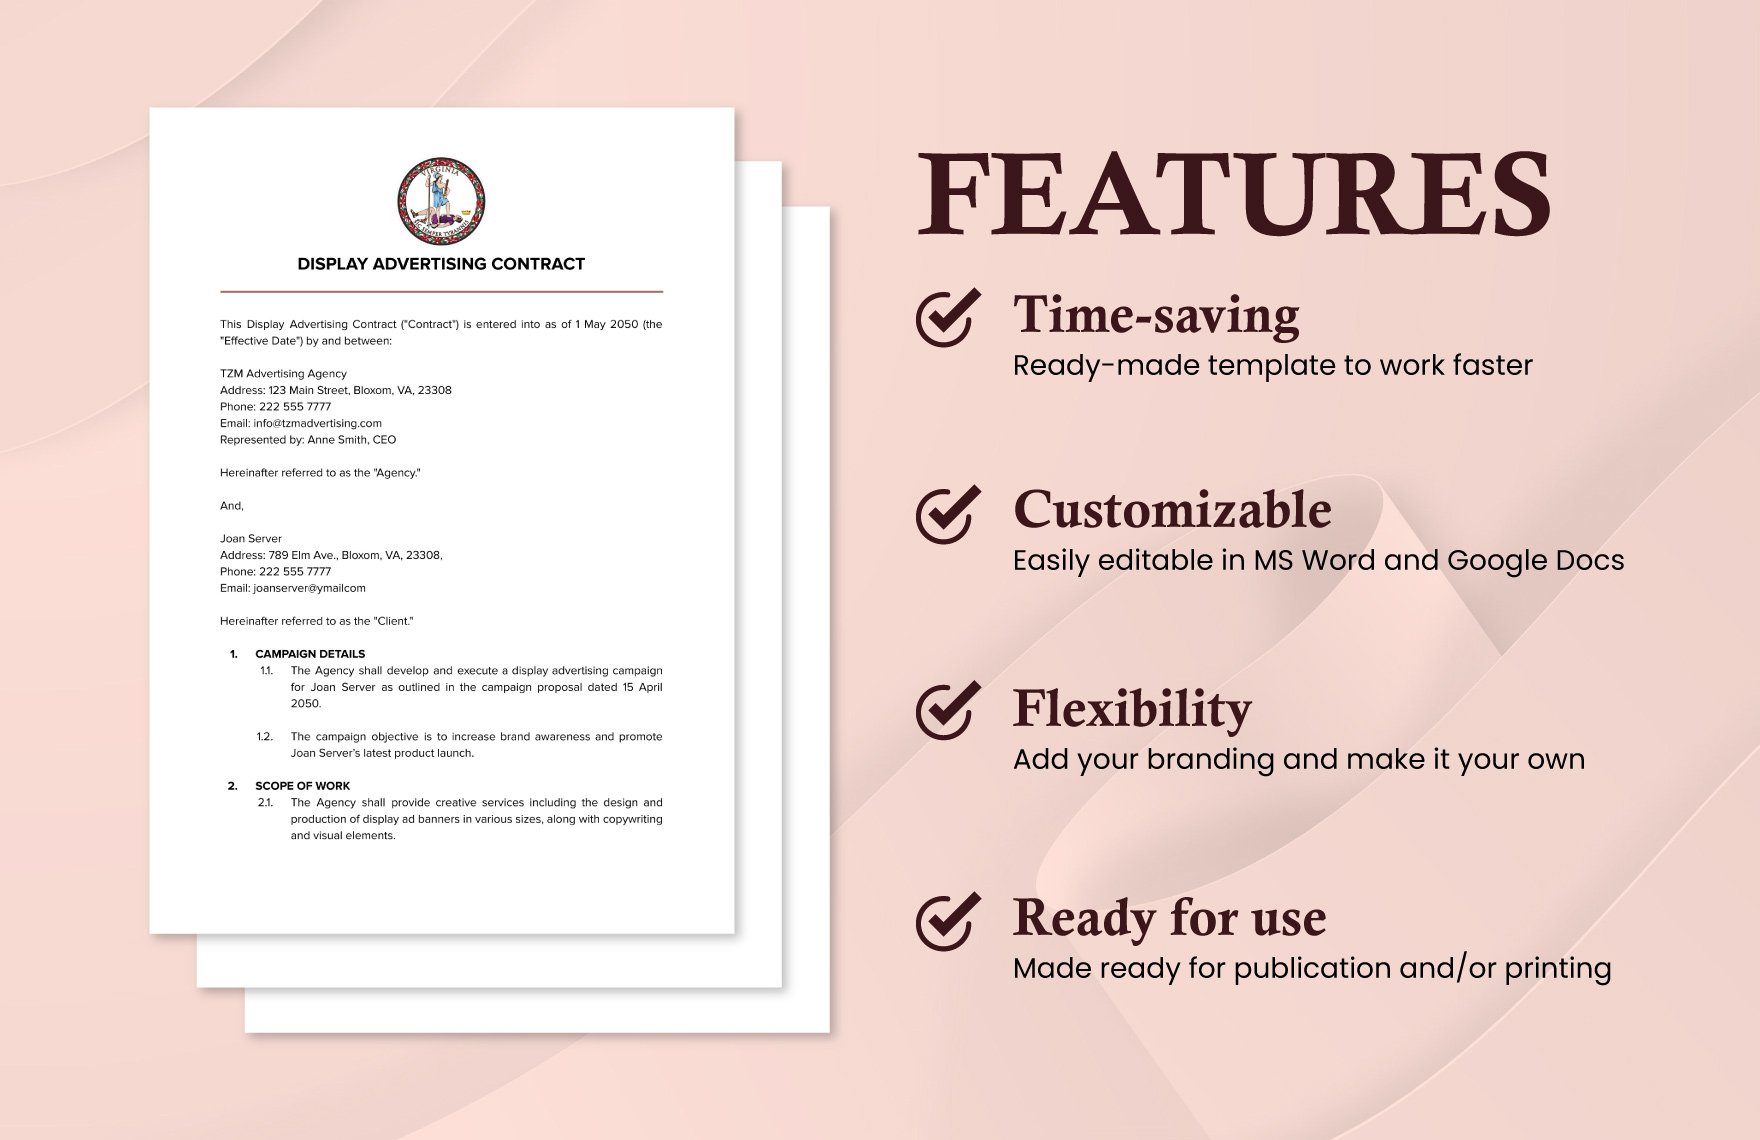 Display Advertising Contract Template